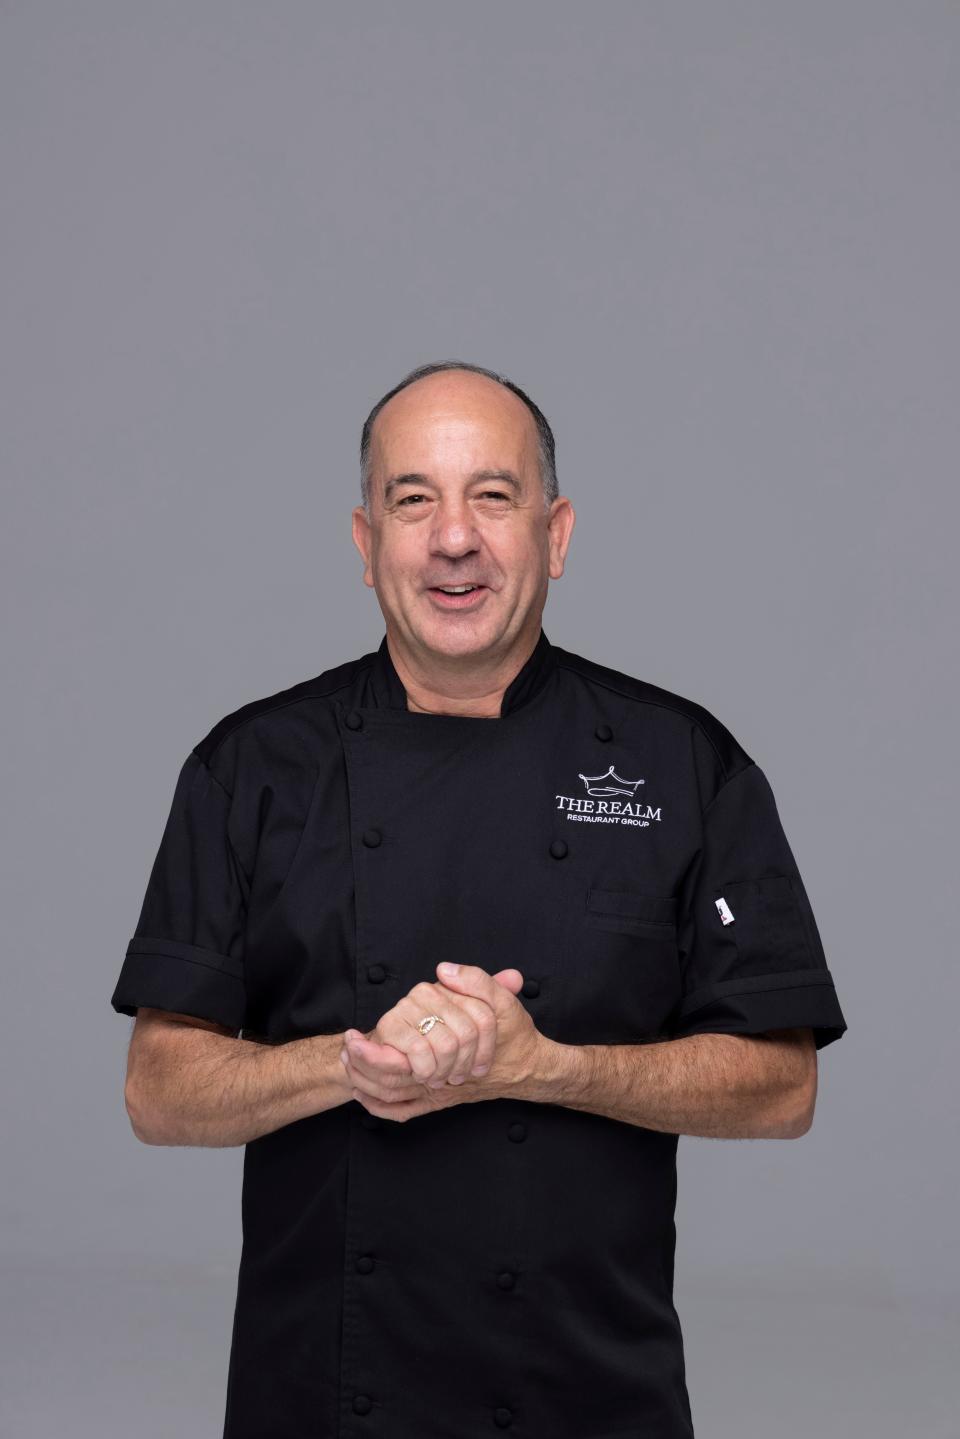 Christopher Covelli is executive chef of both Sage and Bijou Garden Cafe restaurants in downtown Sarasota.